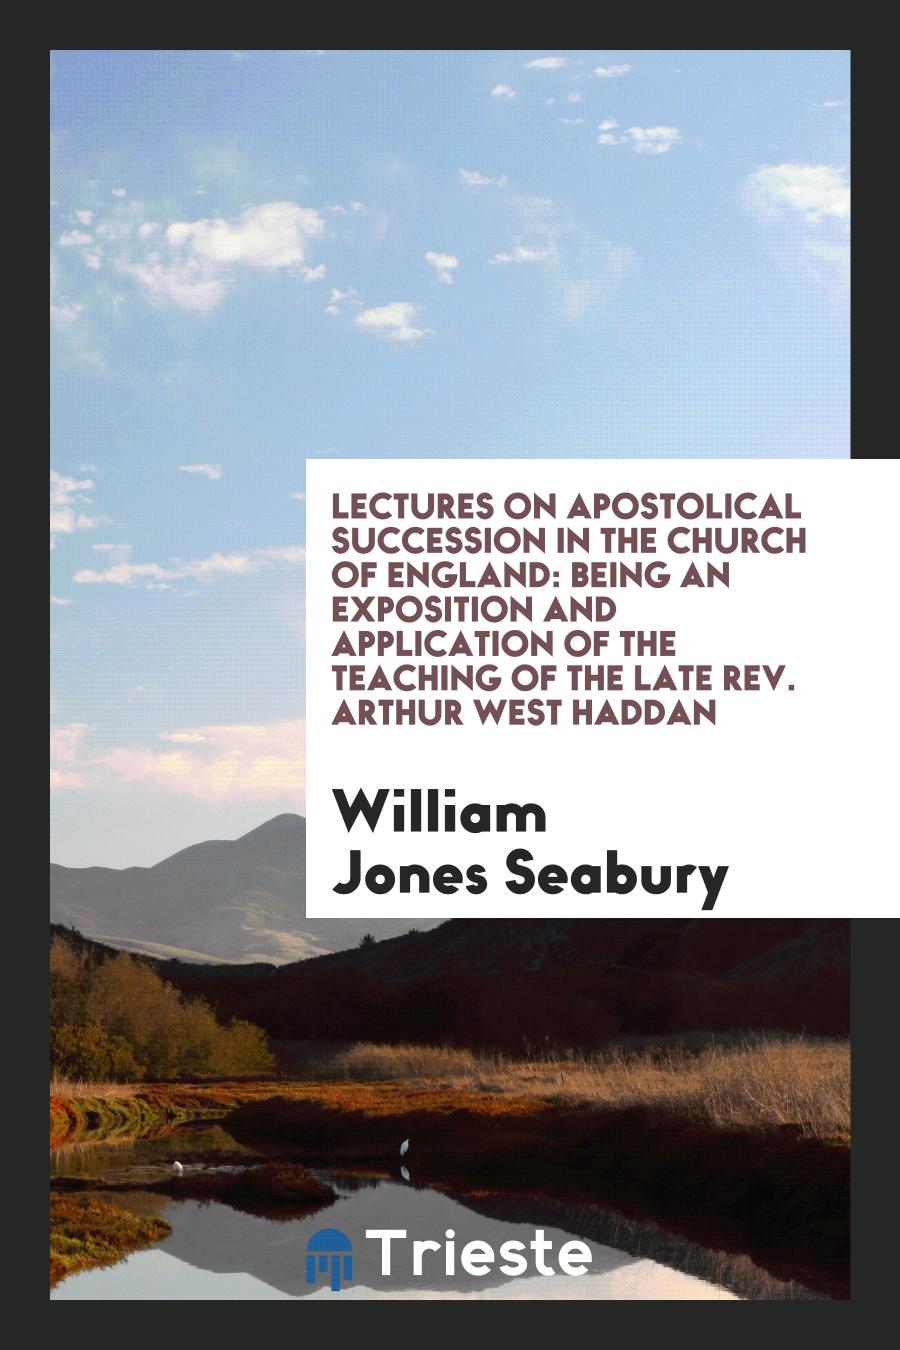 Lectures on Apostolical Succession in the Church of England: Being an Exposition and Application of the Teaching of the Late Rev. Arthur West Haddan